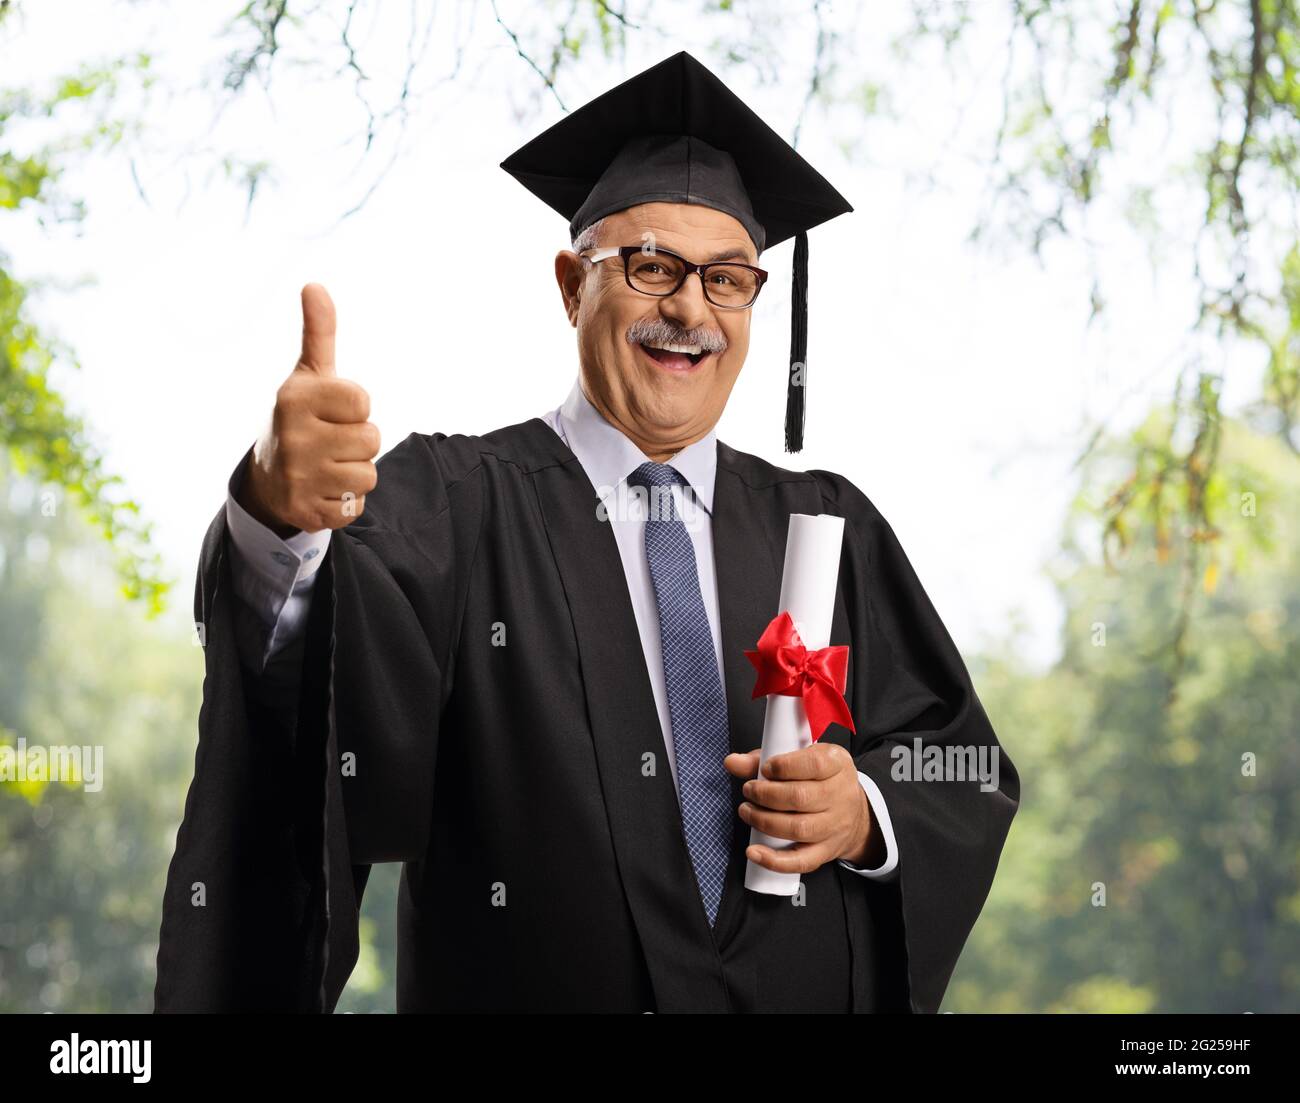 Mature man in a graduation gown holding a diploma and showing thumbs up outdoors Stock Photo